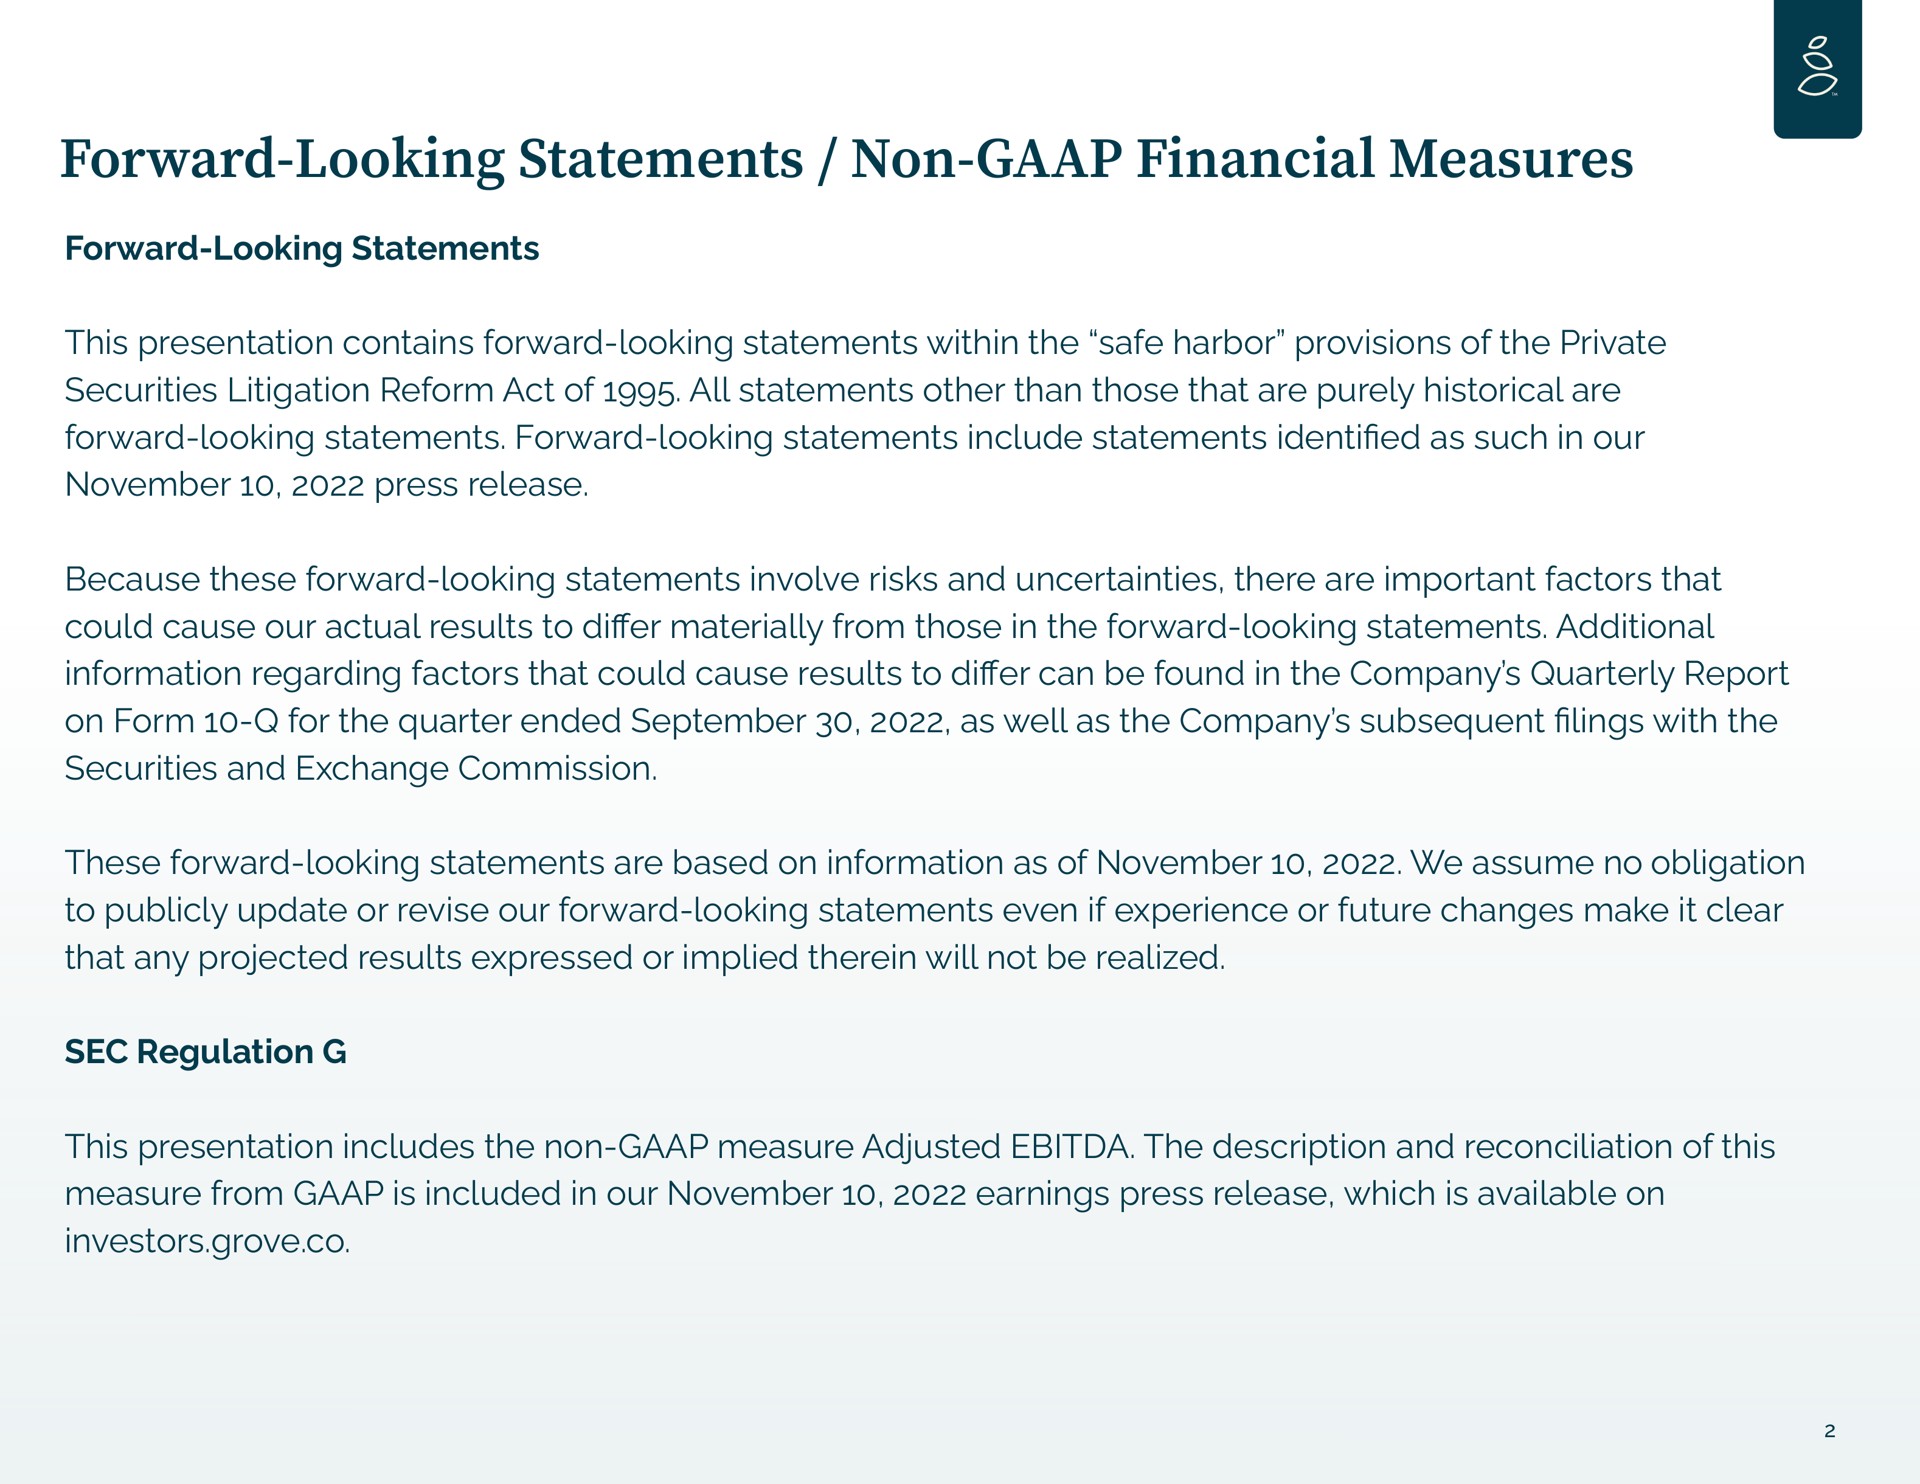 forward looking statements non financial measures forward looking statements this presentation contains forward looking statements within the safe harbor provisions of the private securities litigation reform act of all statements other than those that are purely historical are forward looking statements forward looking statements include statements as such in our press release because these forward looking statements involve risks and uncertainties there are important factors that could cause our actual results to materially from those in the forward looking statements additional information regarding factors that could cause results to can be found in the company quarterly report on form for the quarter ended as well as the company subsequent lings with the securities and exchange commission these forward looking statements are based on information as of we assume no obligation to publicly update or revise our forward looking statements even if experience or future changes make it clear that any projected results expressed or implied therein will not be realized sec regulation this presentation includes the non measure adjusted the description and reconciliation of this measure from is included in our earnings press release which is available on investors grove identified | Grove